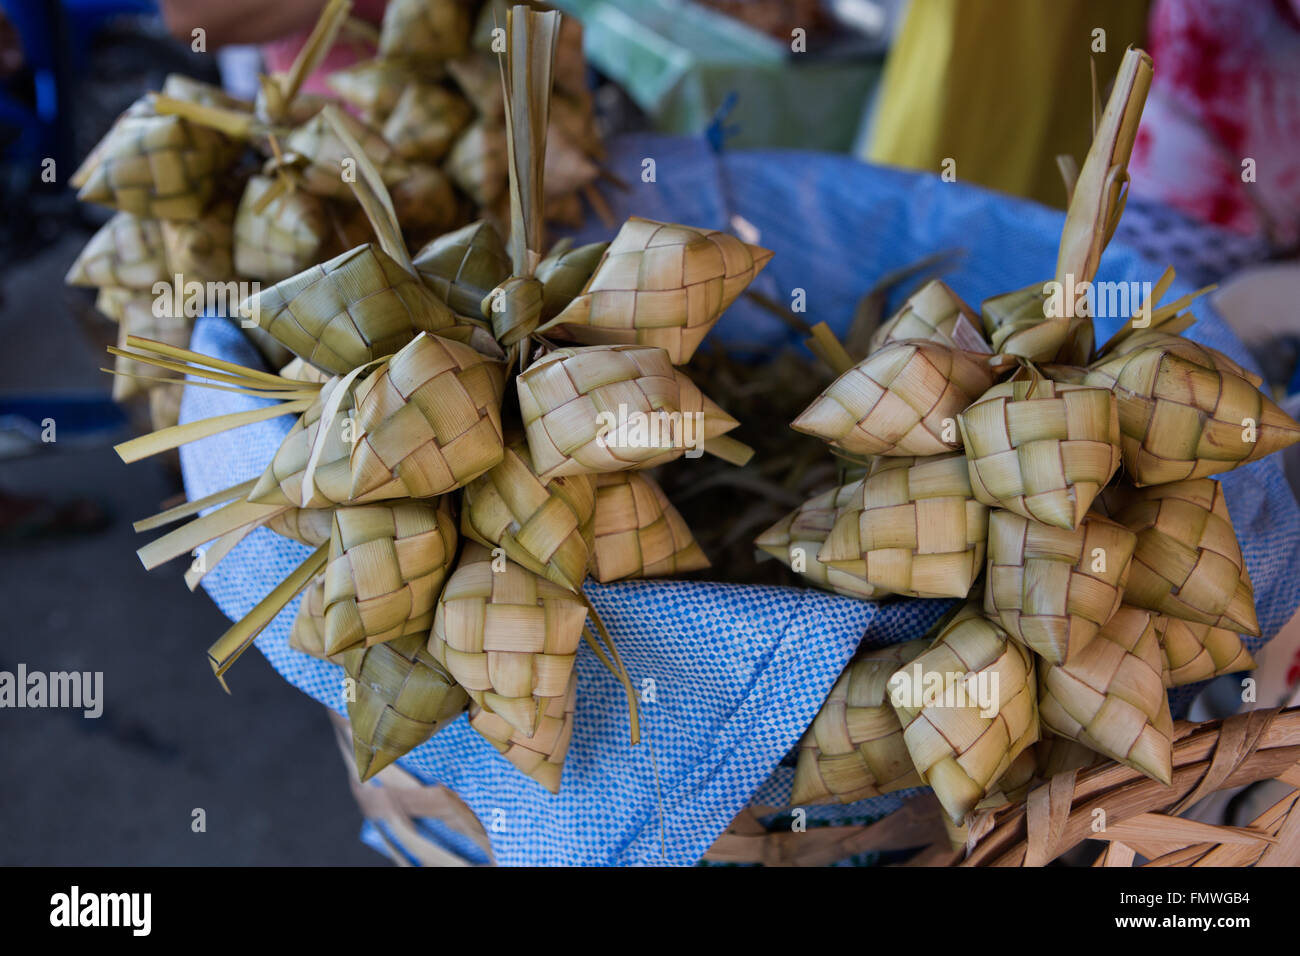 Rice steamed in young woven coconut leaves,known as Puso, a speciality of the Visayas area in the Philippines Stock Photo